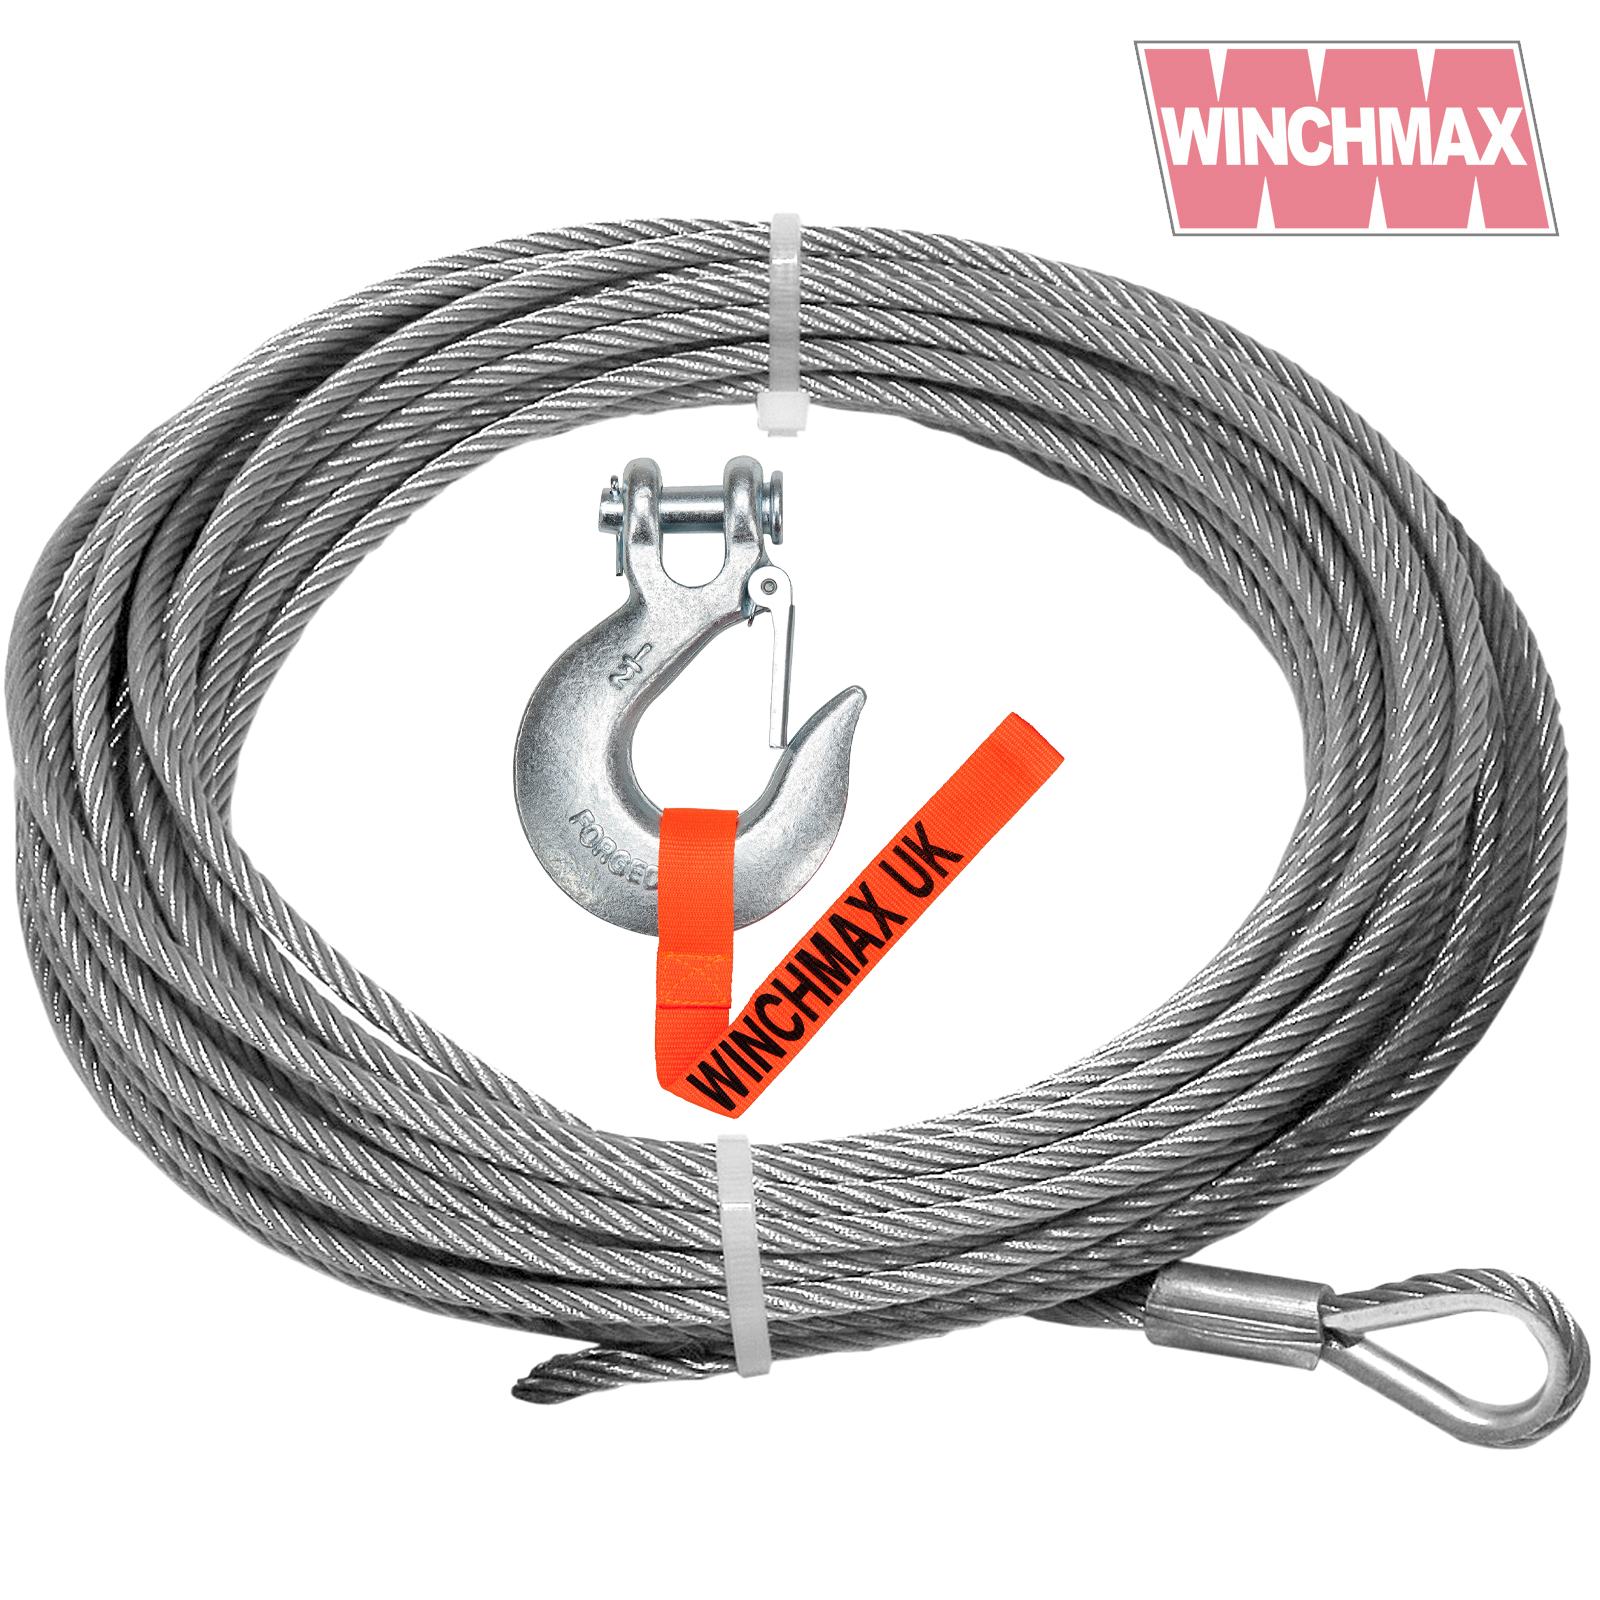 Steel Rope 26m x 9.5mm, Hole Fix. 3/8 inch Clevis Hook. For winches up to  13,500lb. - Winchmax